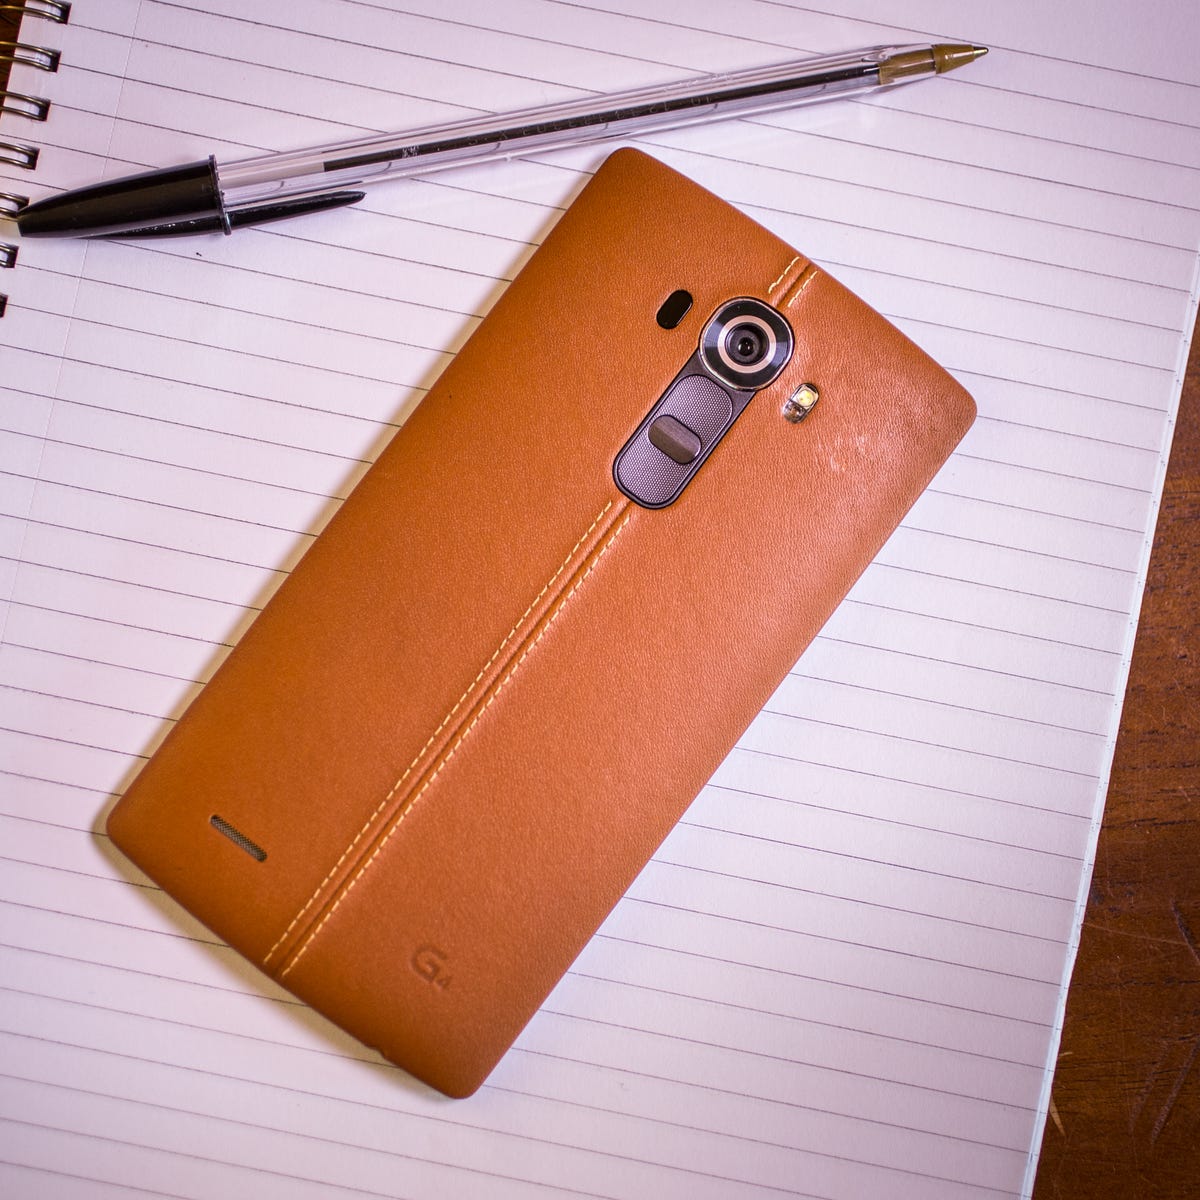 Vacature Vervullen Supplement LG G4 review: This powerful, fast beauty takes too few chances - CNET